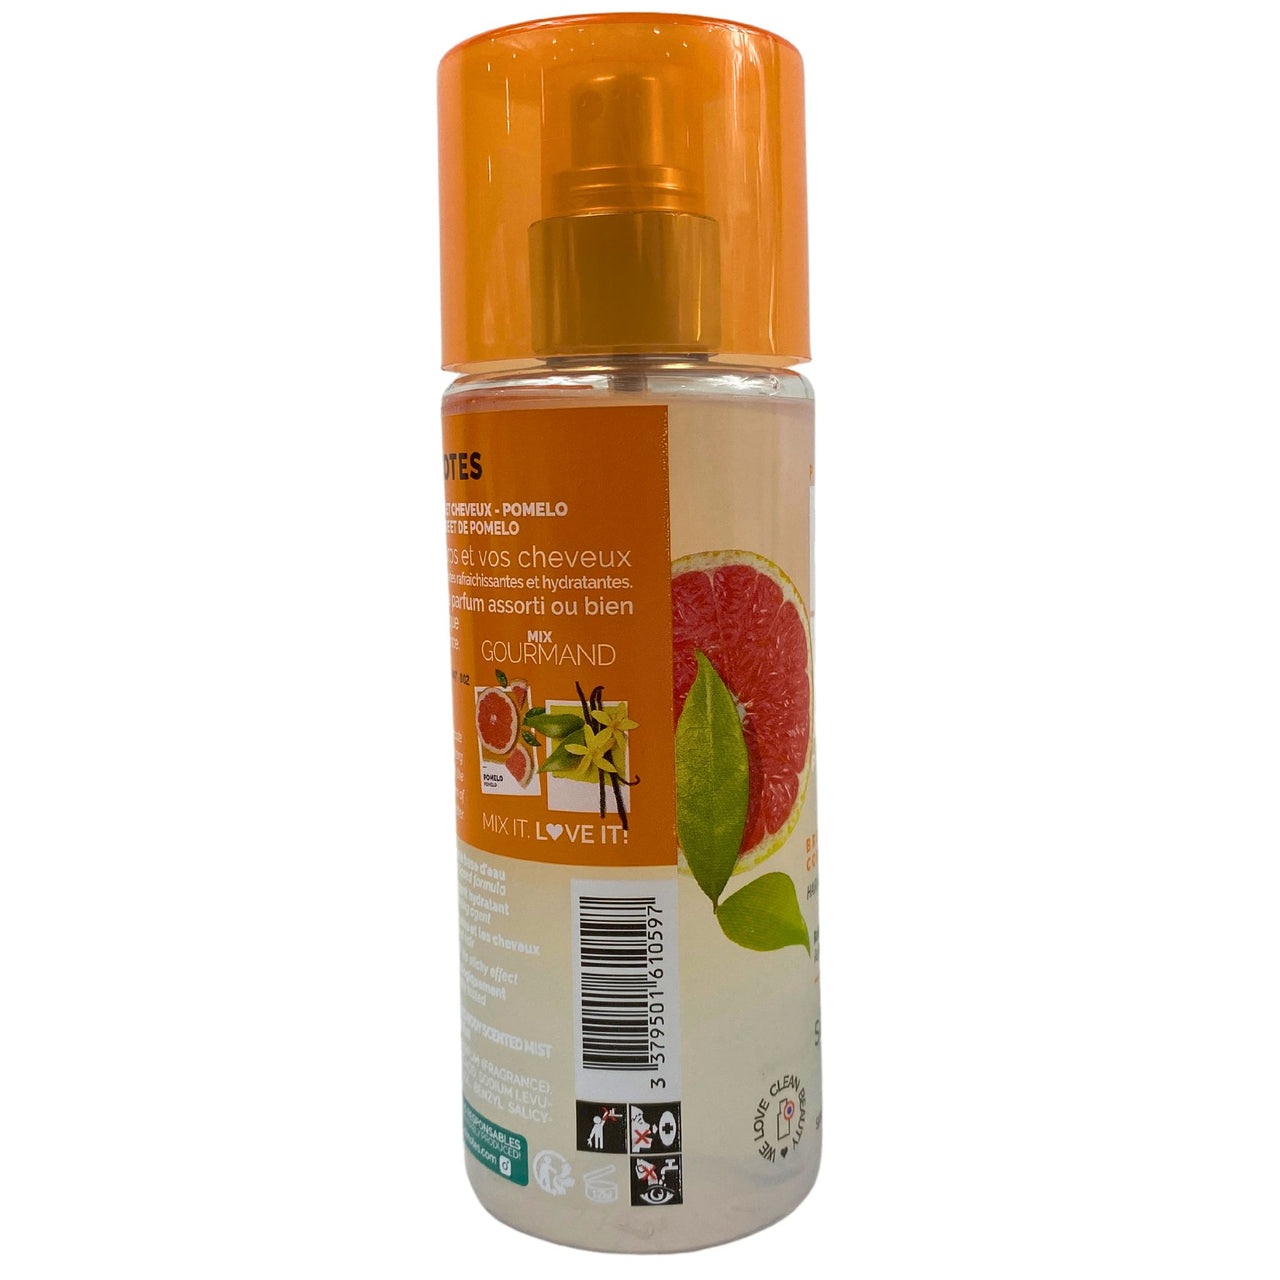 Parfum Pomelo Hair & Body Scented Mist Refreshing and Moisturizing 